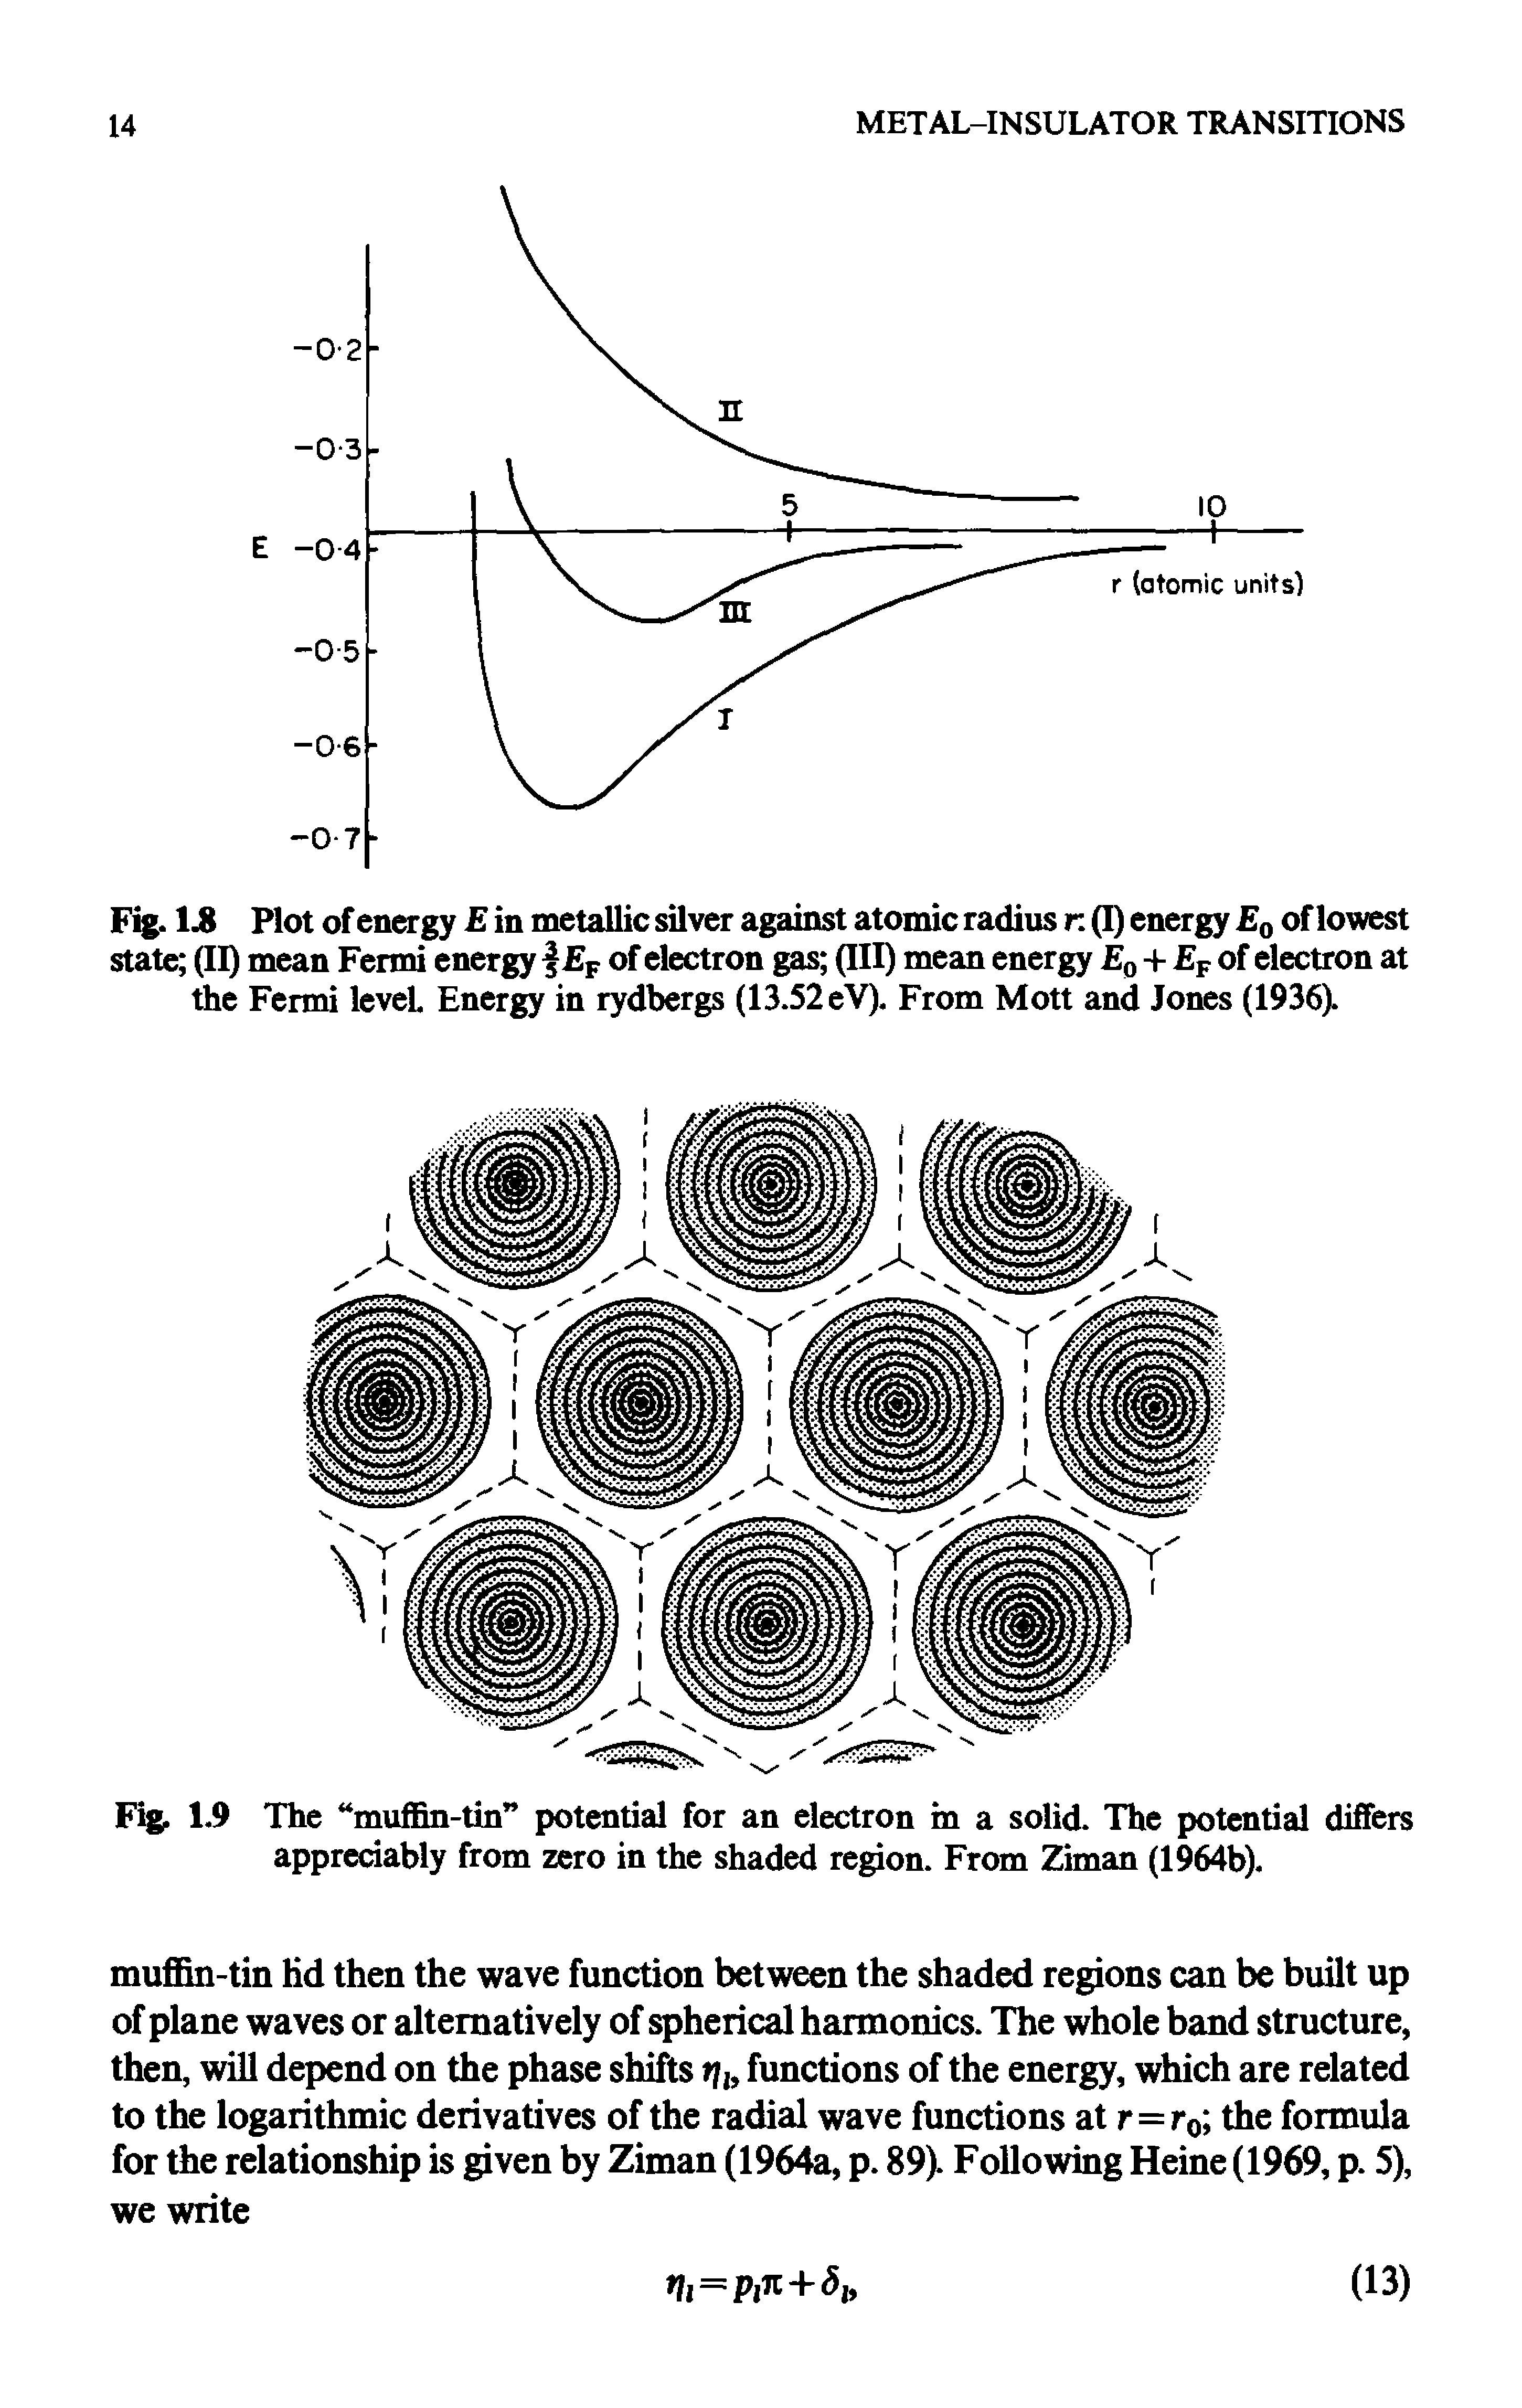 Fig. 1.9 The muffin-tin potential for an electron in a solid. The potential differs appreciably from zero in the shaded region. From Ziman (1964b).